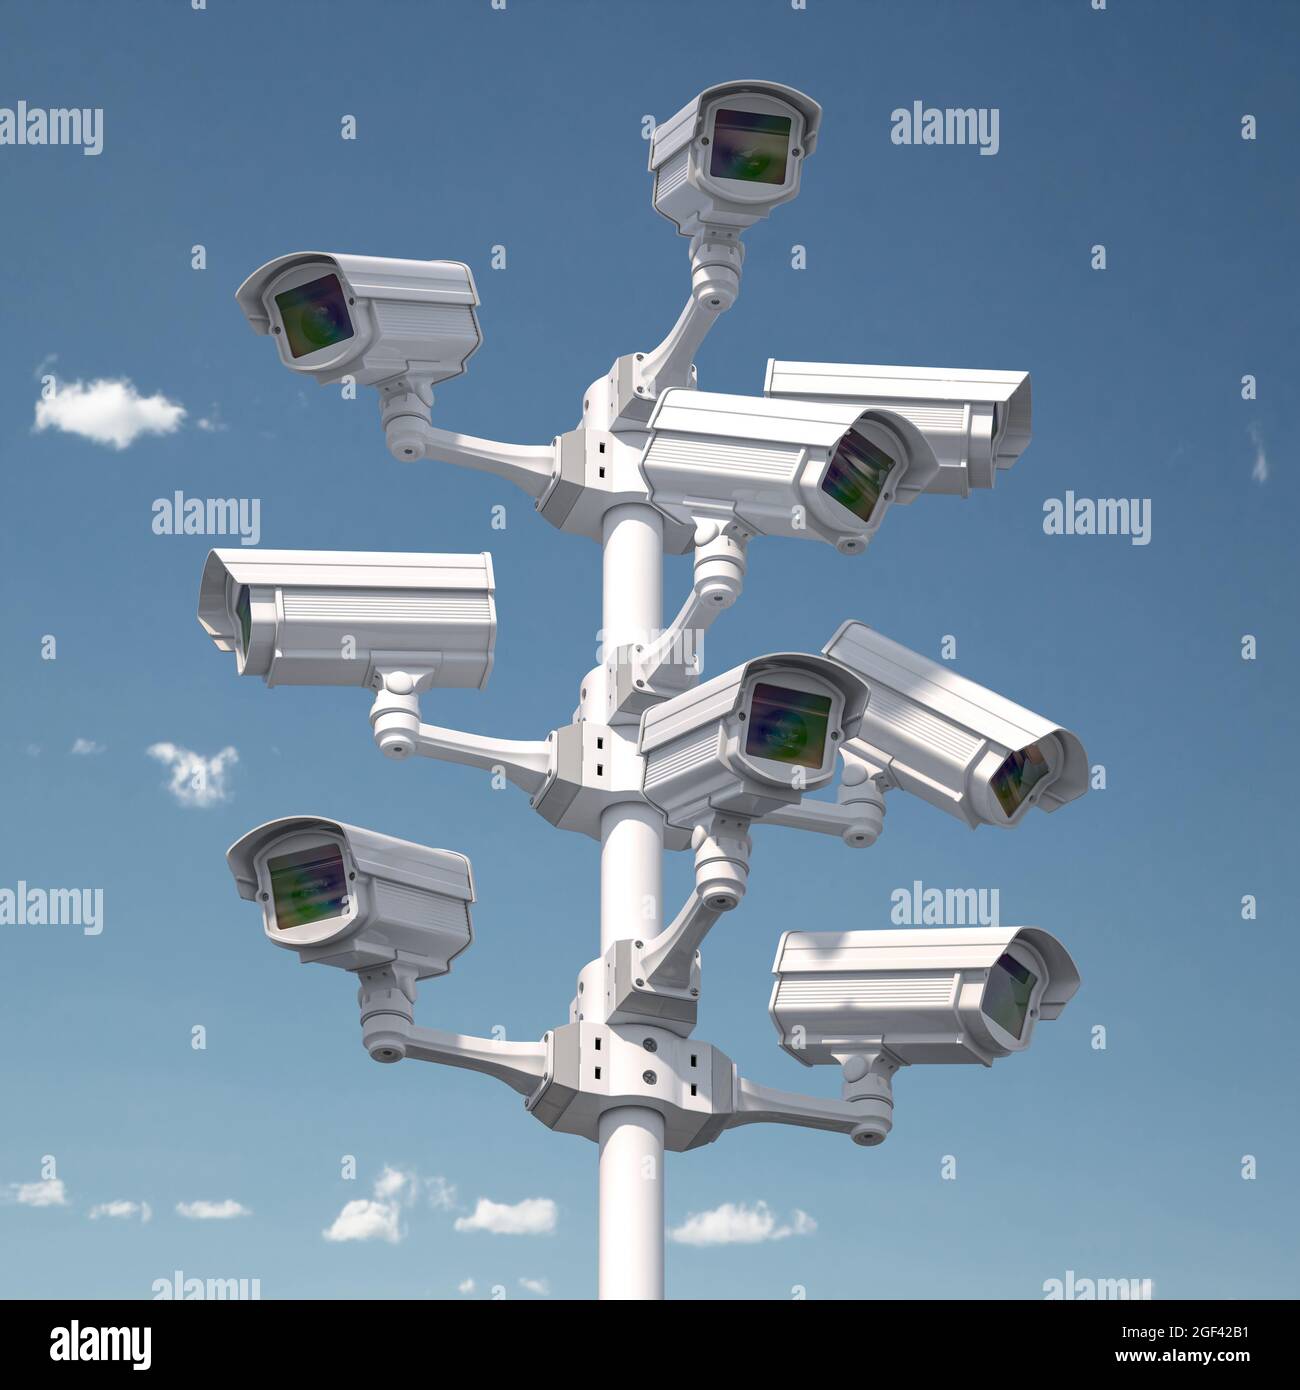 CCTV security cameras on the pole. Safety and protection concept. 3d illustration. Stock Photo